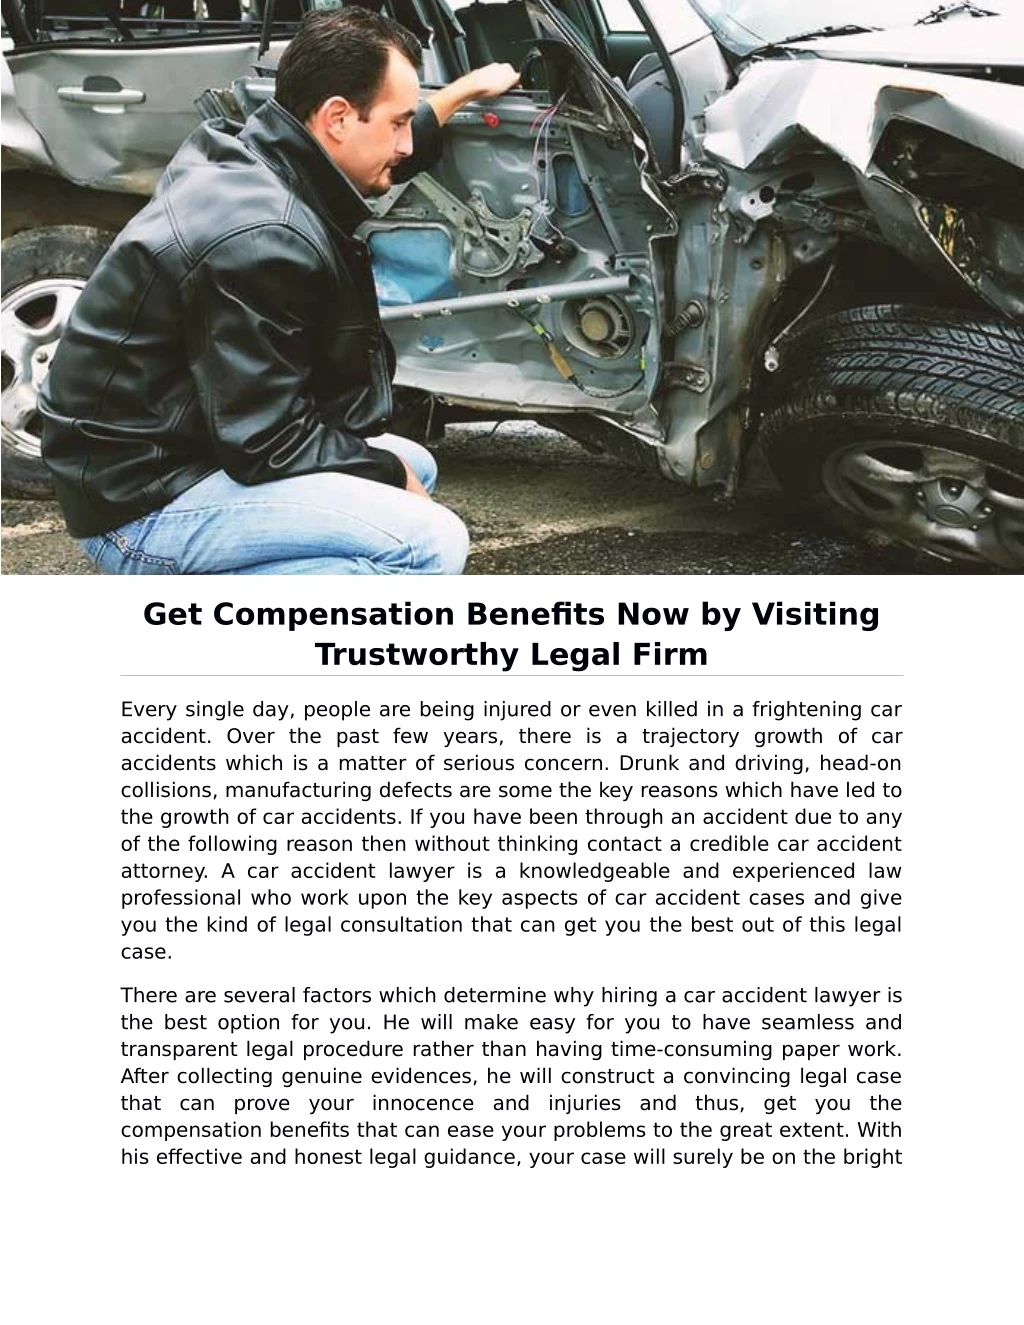 get compensation benefits now by visiting